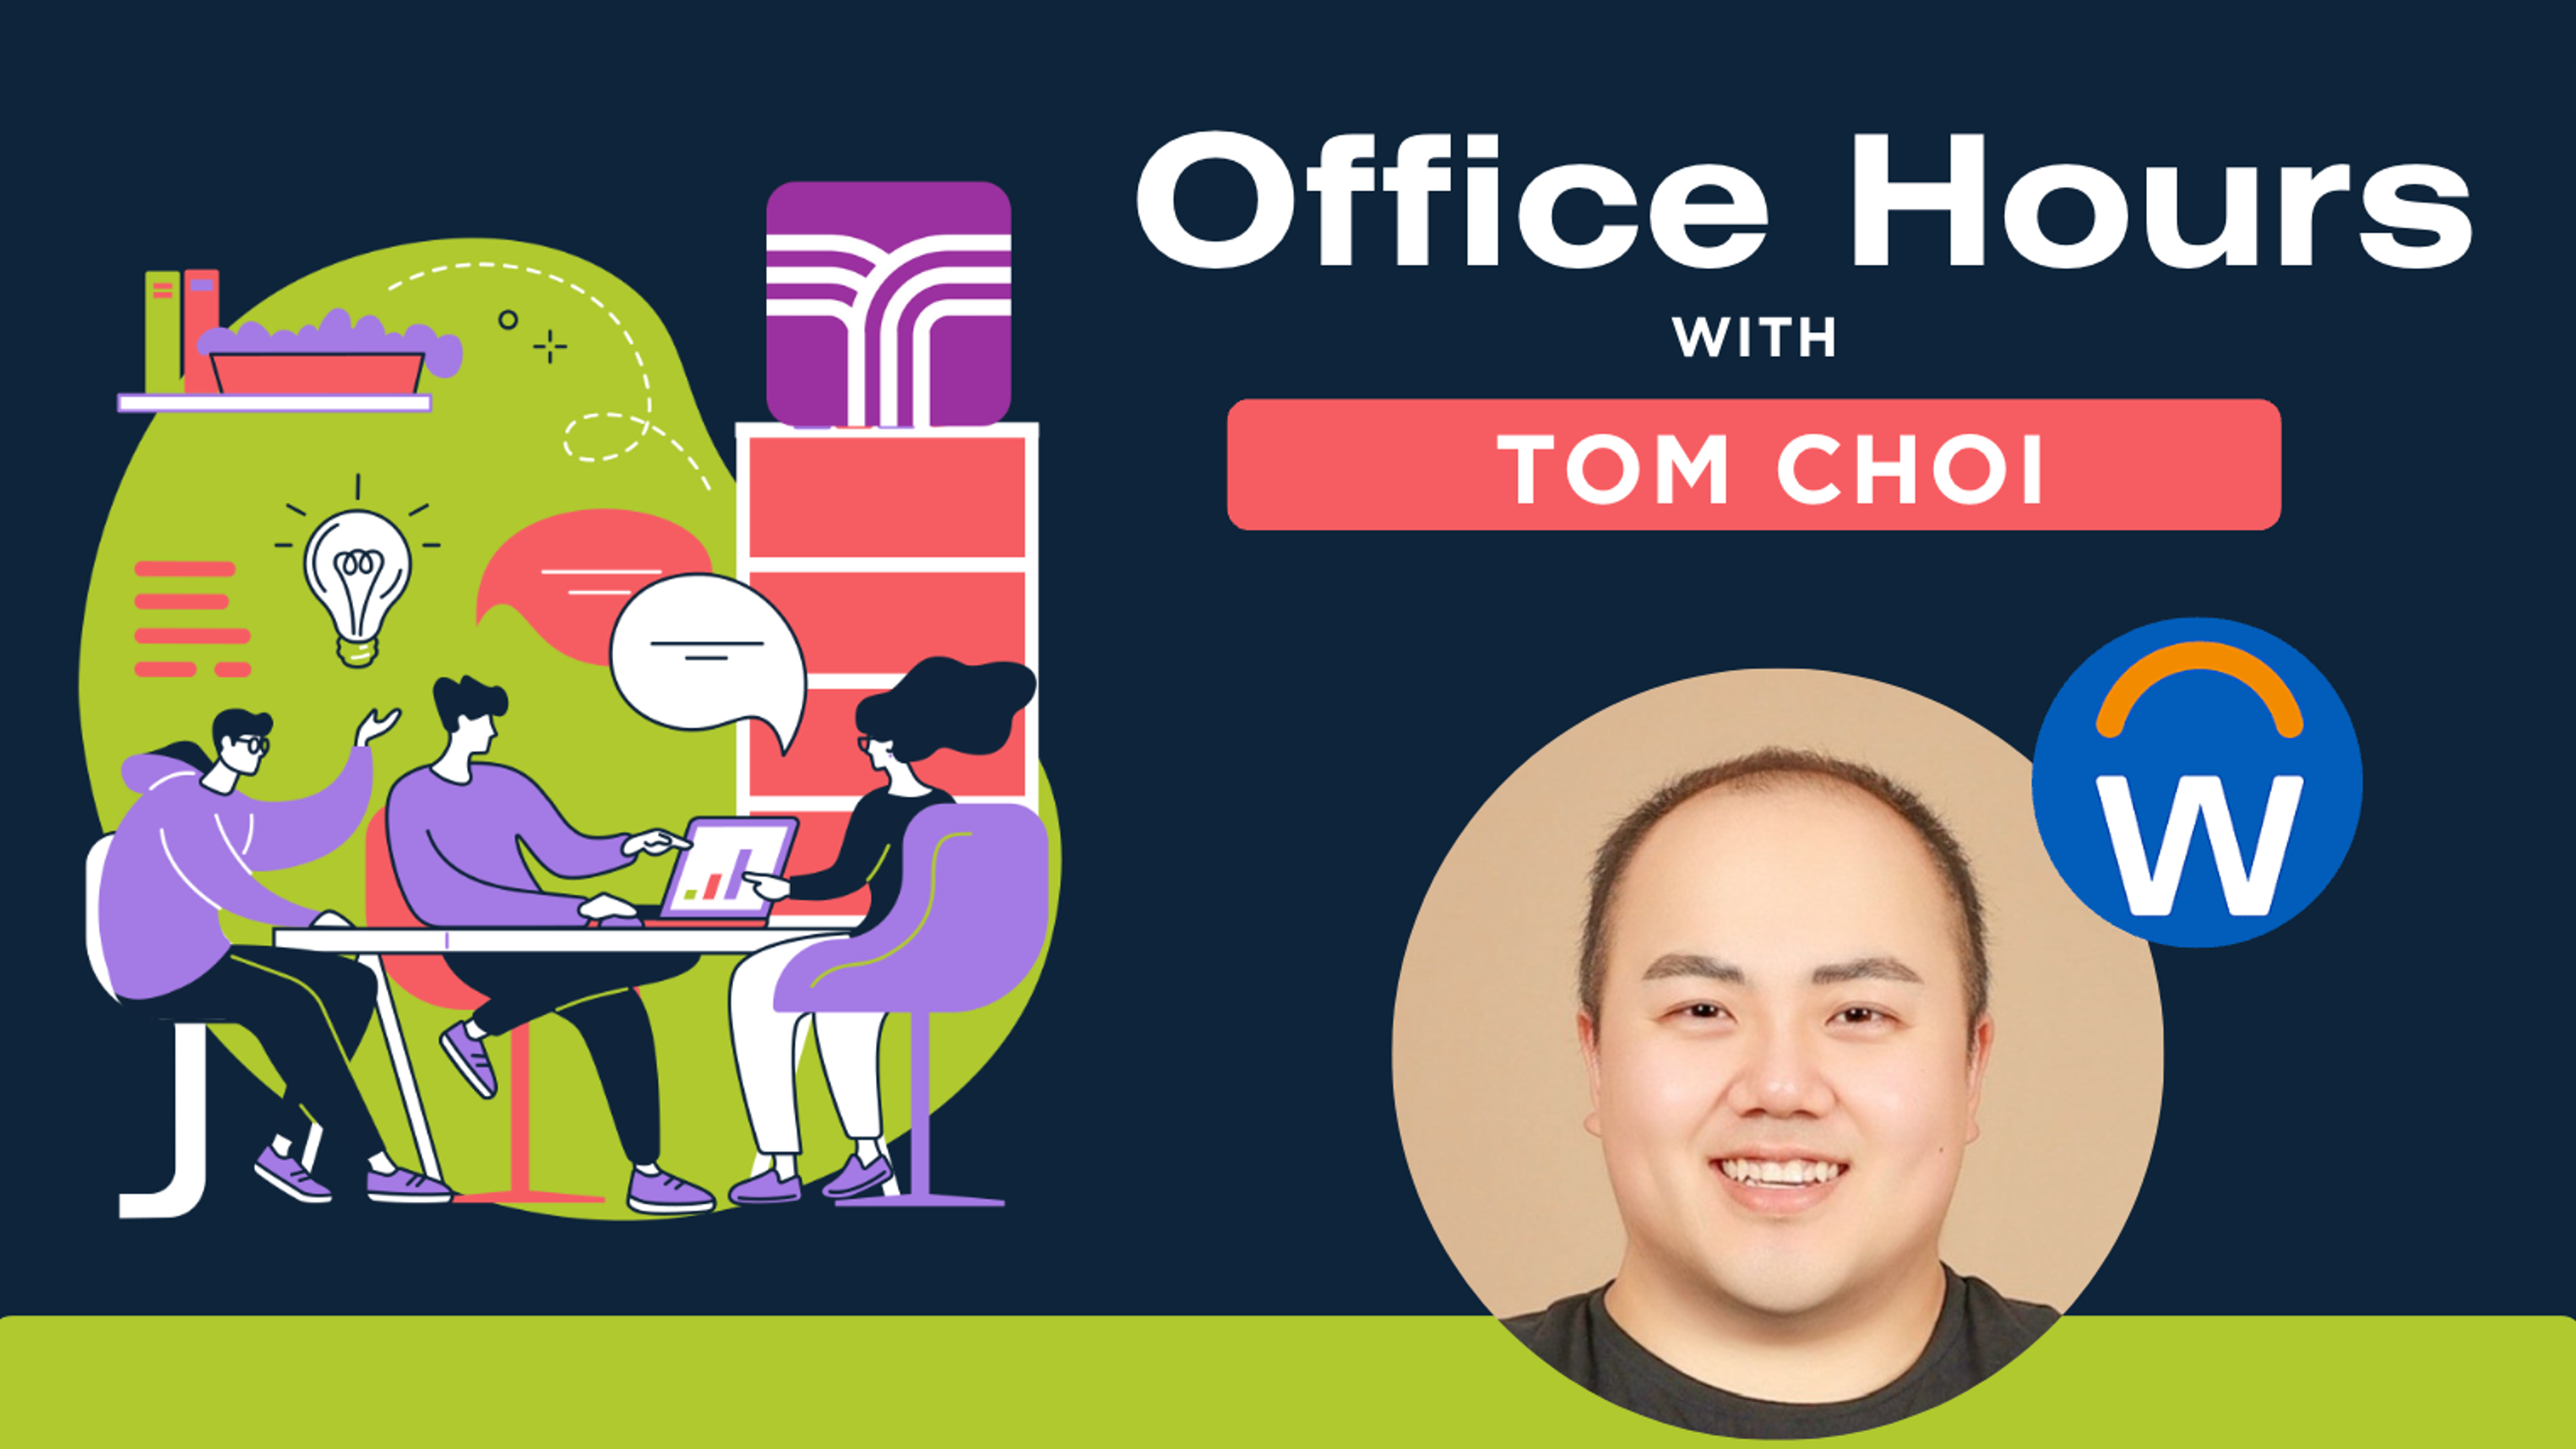 Office Hours with Tom Choi event